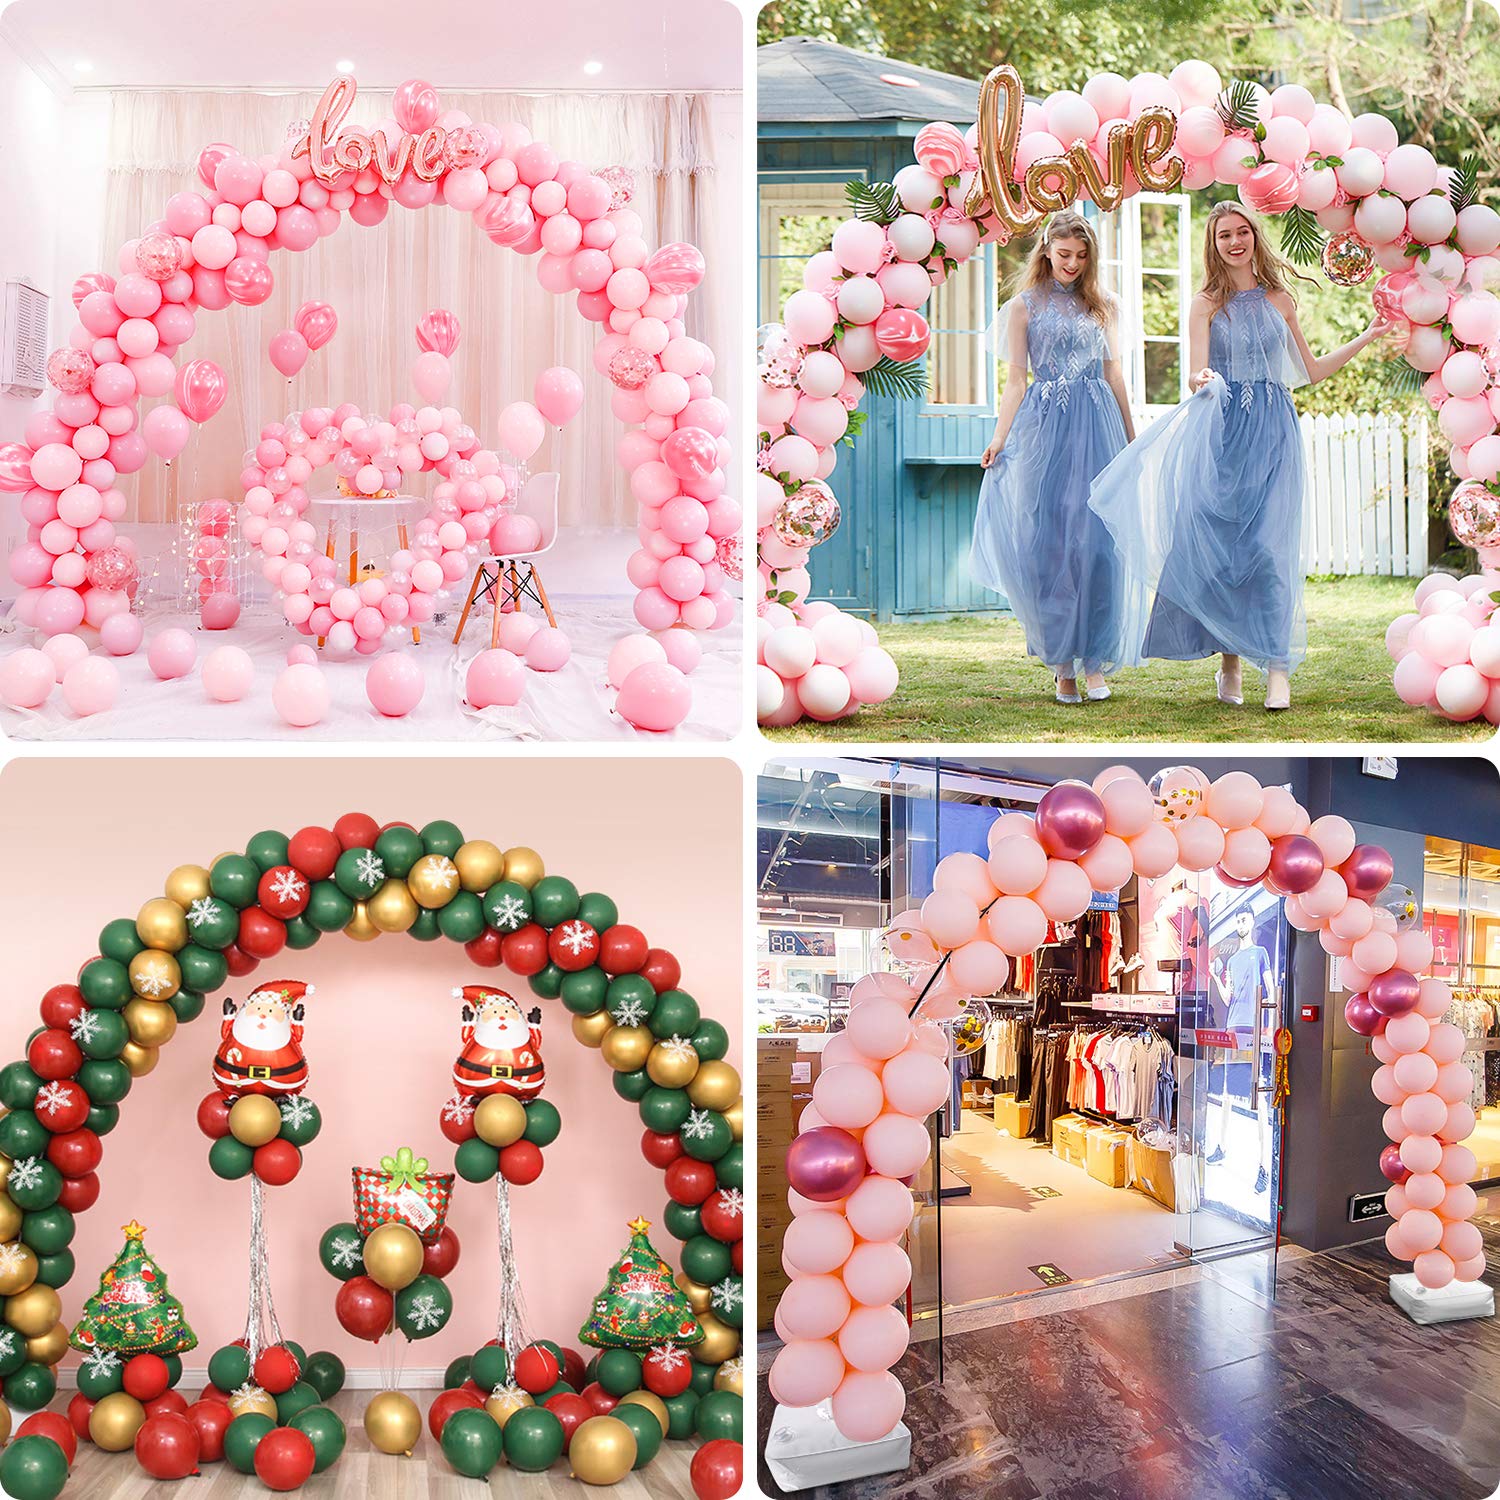 Chamvis Balloon Arch Kit,9FT Tall & 10Ft Wide Adjustable Balloon Arch Stand with Water Fillable Base,50Pcs Balloon Clips,Balloon Pump Knotter Dot Glue-For Wedding Baby Shower Birthday Party Supplies Decorations